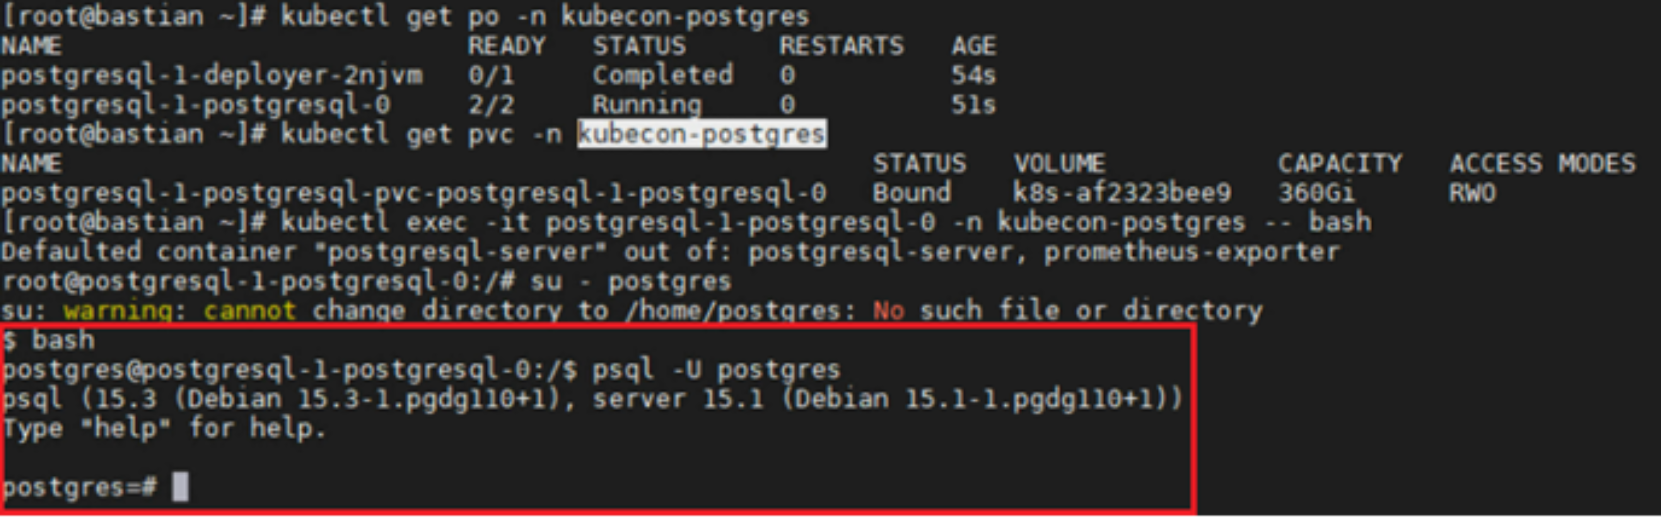 This figure shows the verification of Postgres database in the cluster.